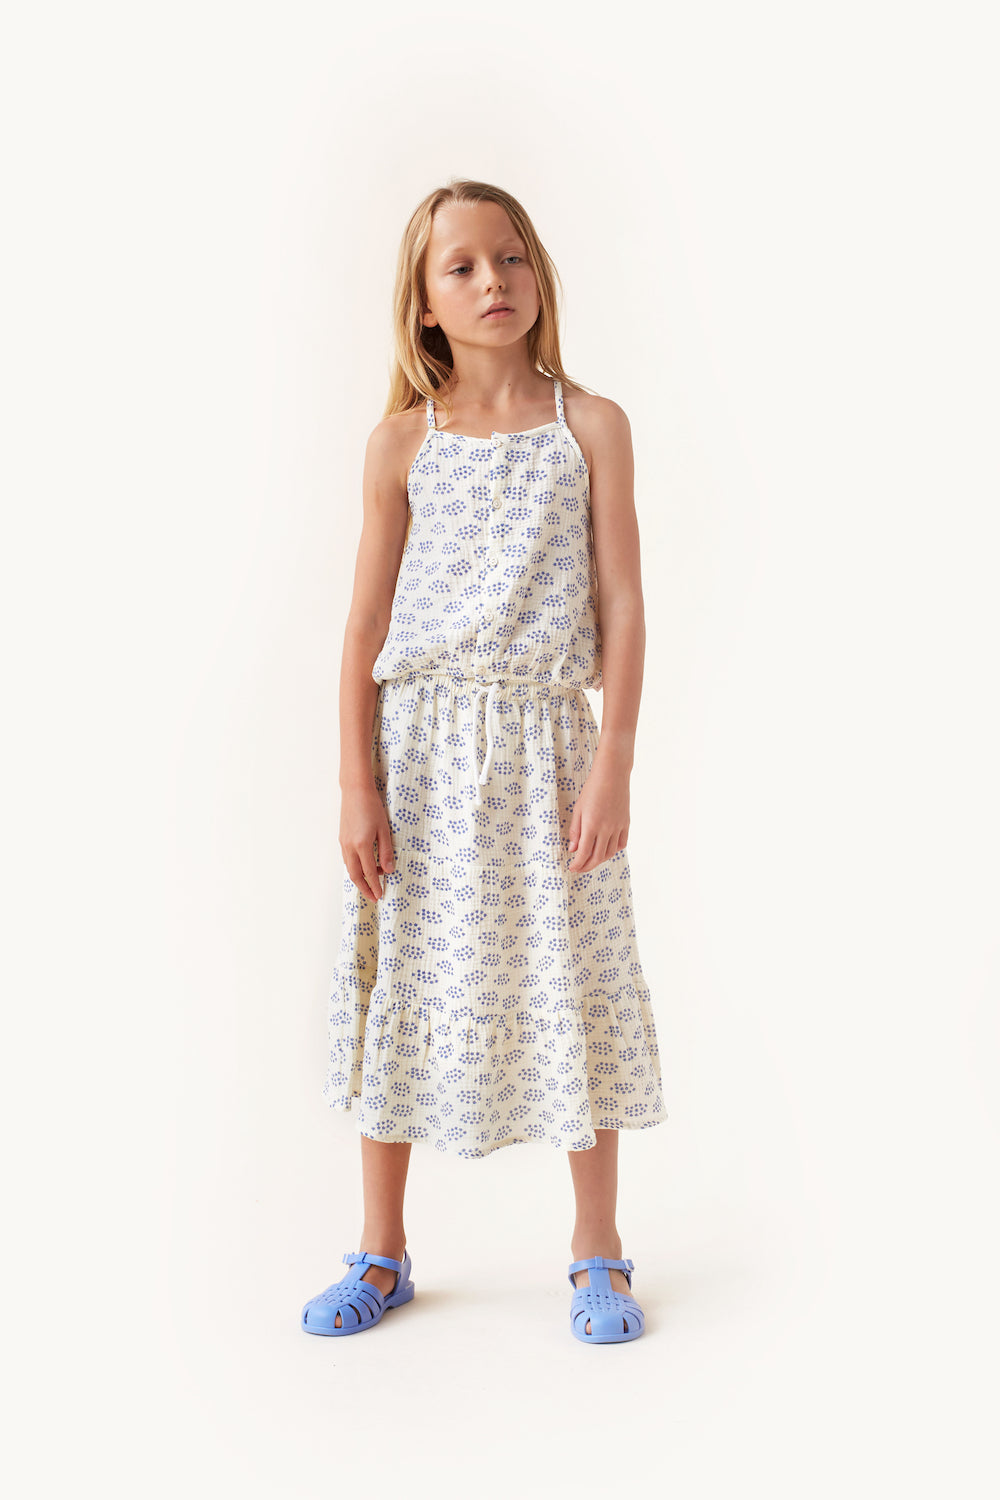 Tiny Cottons Forget Me Not Long Skirt - Pastel Yellow/Ultramarine